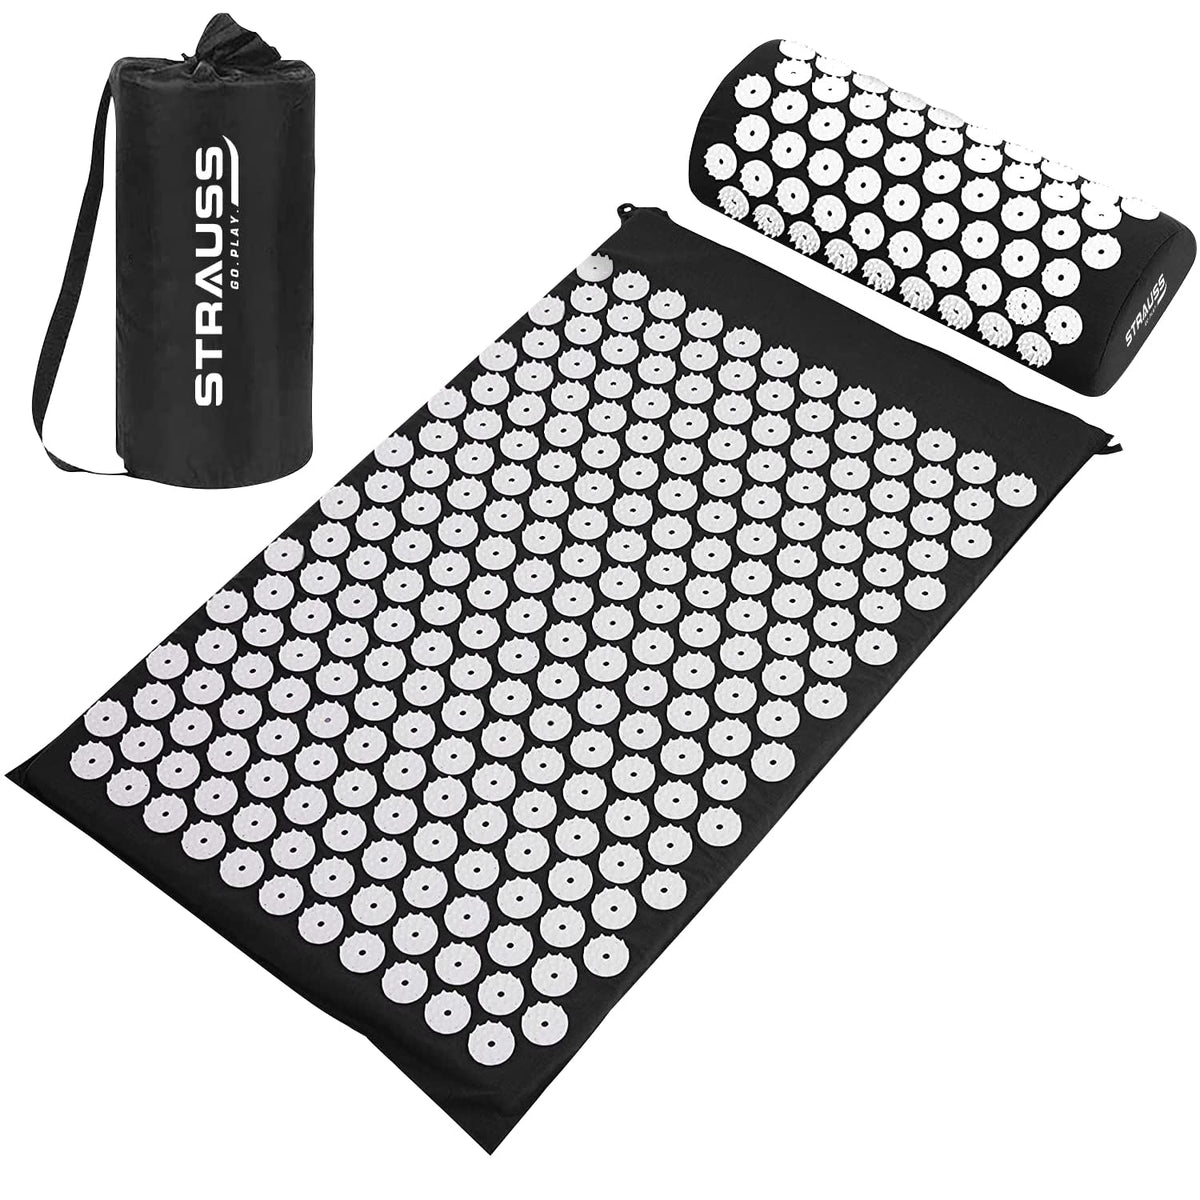 STRAUSS Pain Relief Acupressure Exercise Mat with Pillow|Yoga Acupuncture Mat for Trigger Point Therapy, Muscle Relaxation|Helps Cure Sciatica, Improve Blood Circulation |Comes with Carry Bag, (Black)